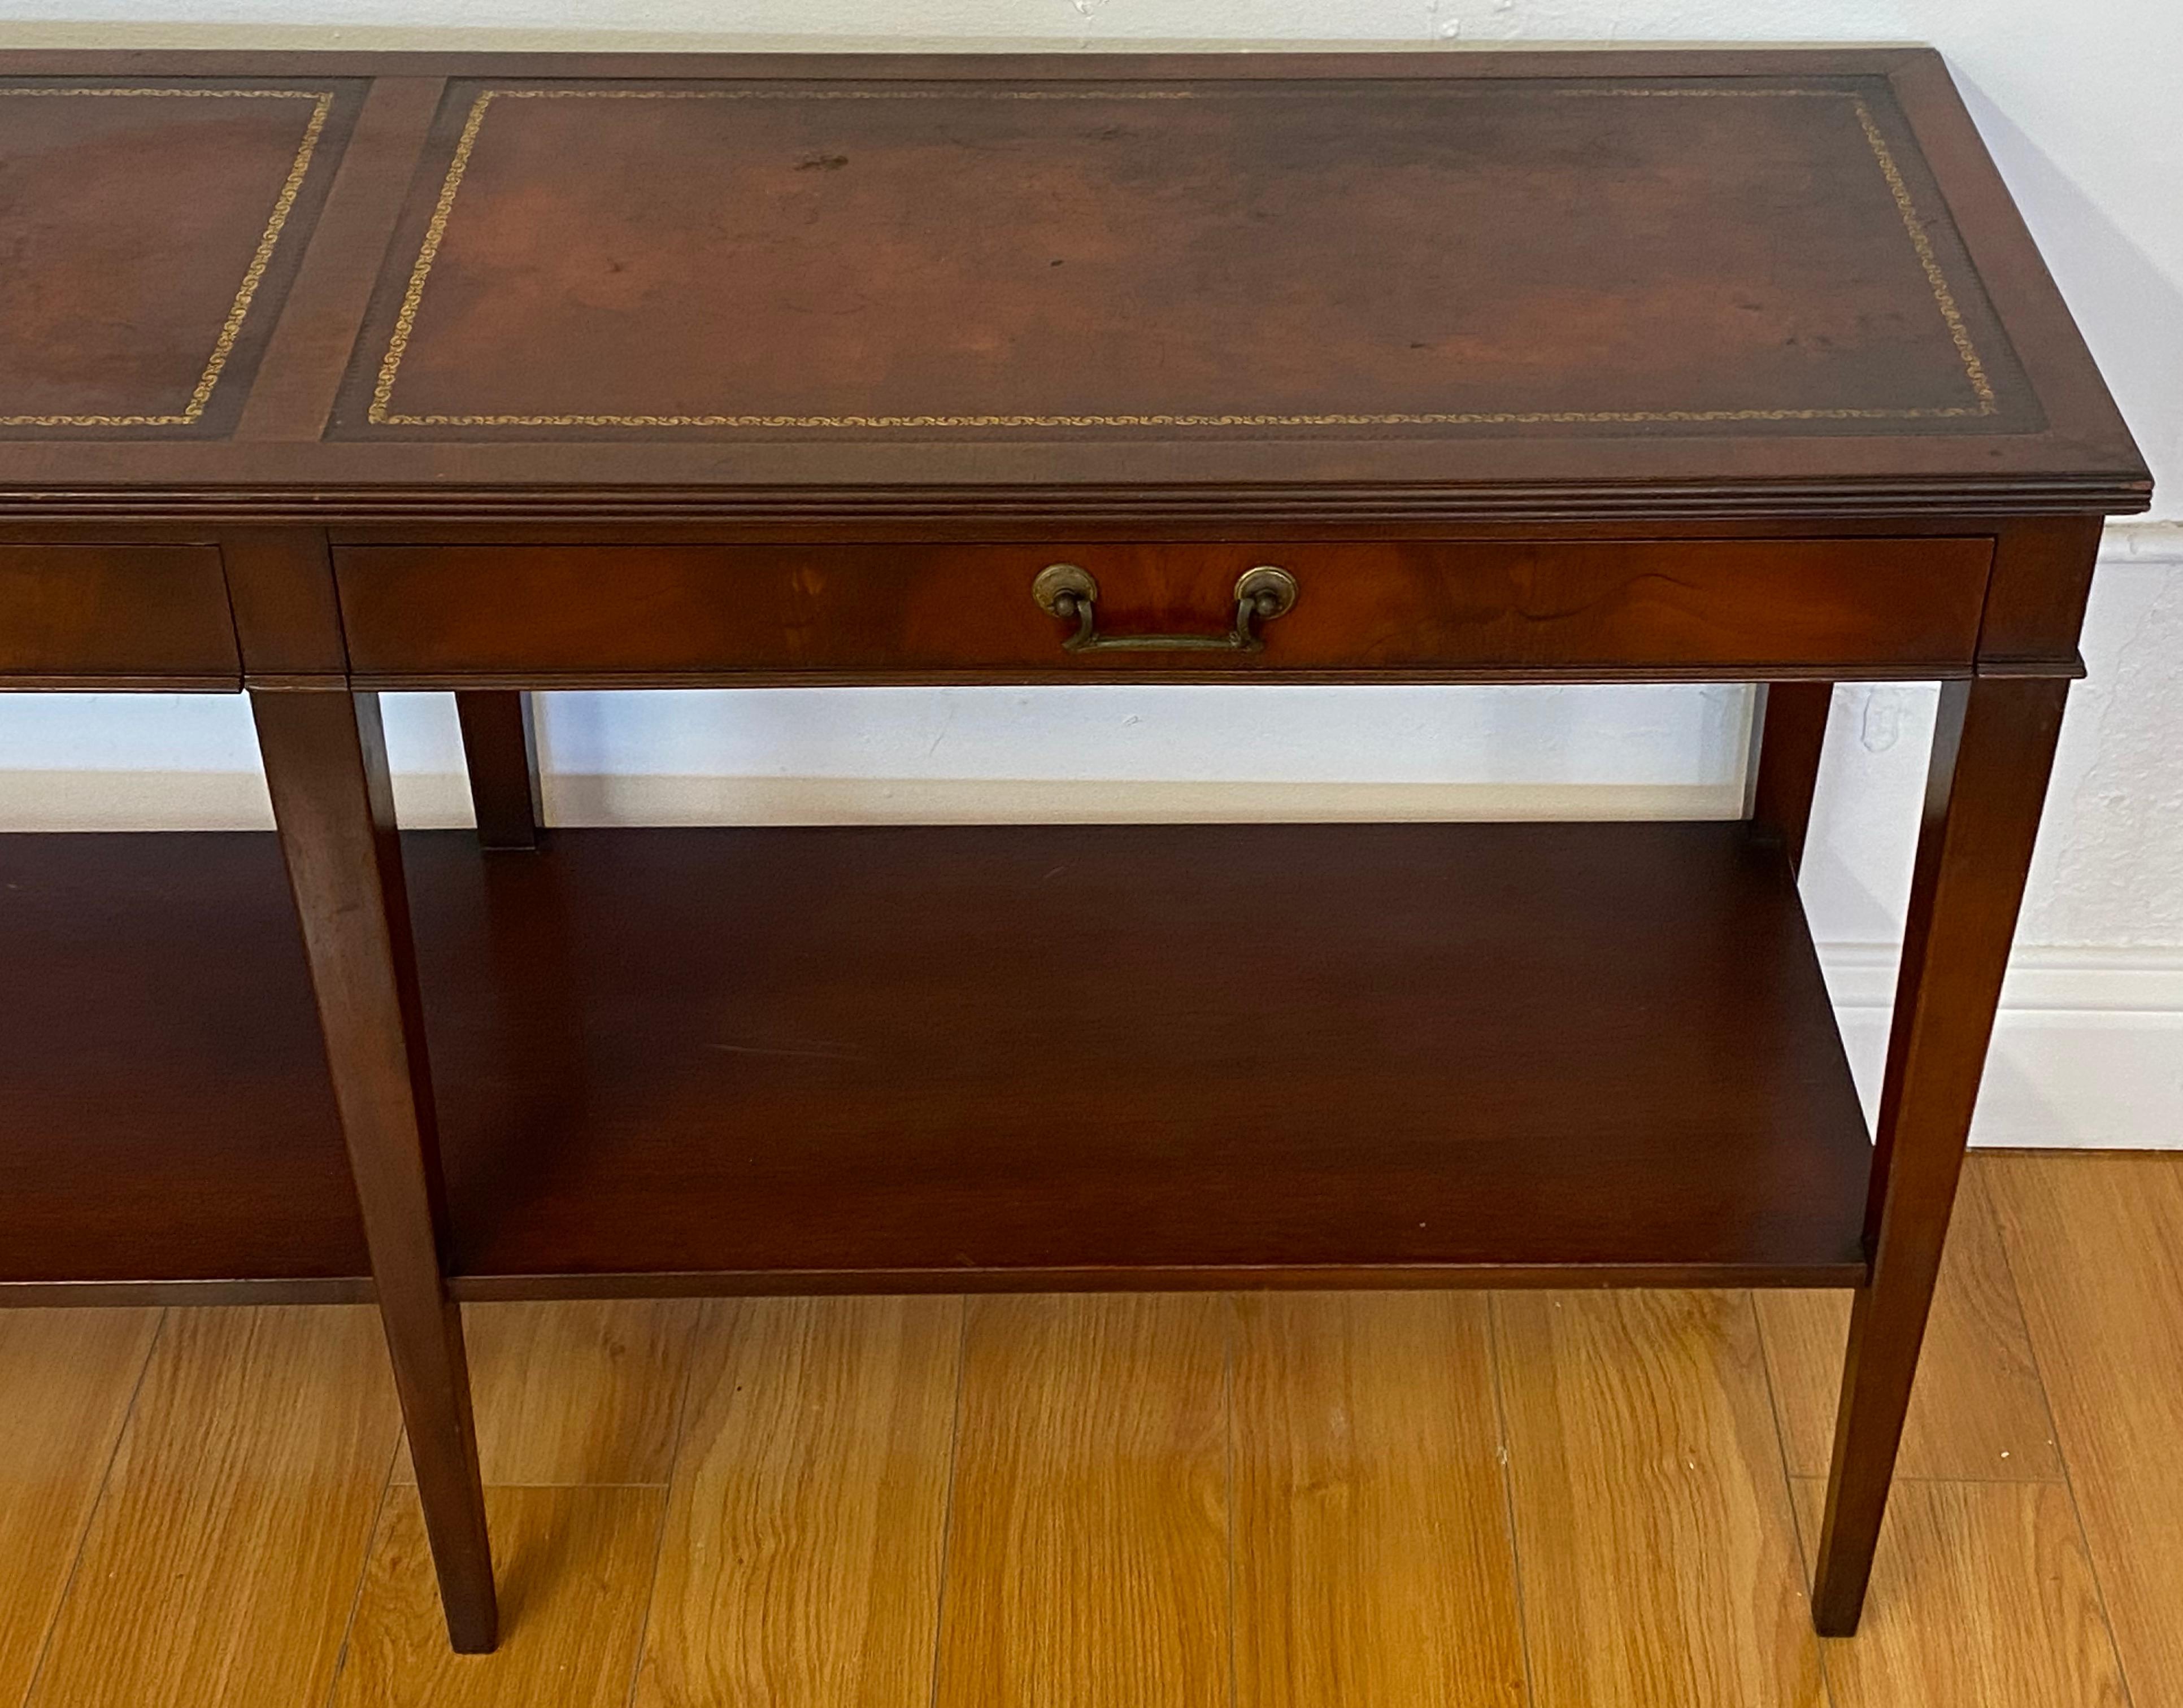 Mid century mahogany two drawer console table by W & J Sloan 

Two drawers under embossed leather panels

The leather shows some distress, but still looks good after 60+ years!

The mahogany frame shows minor loss to the finish - See